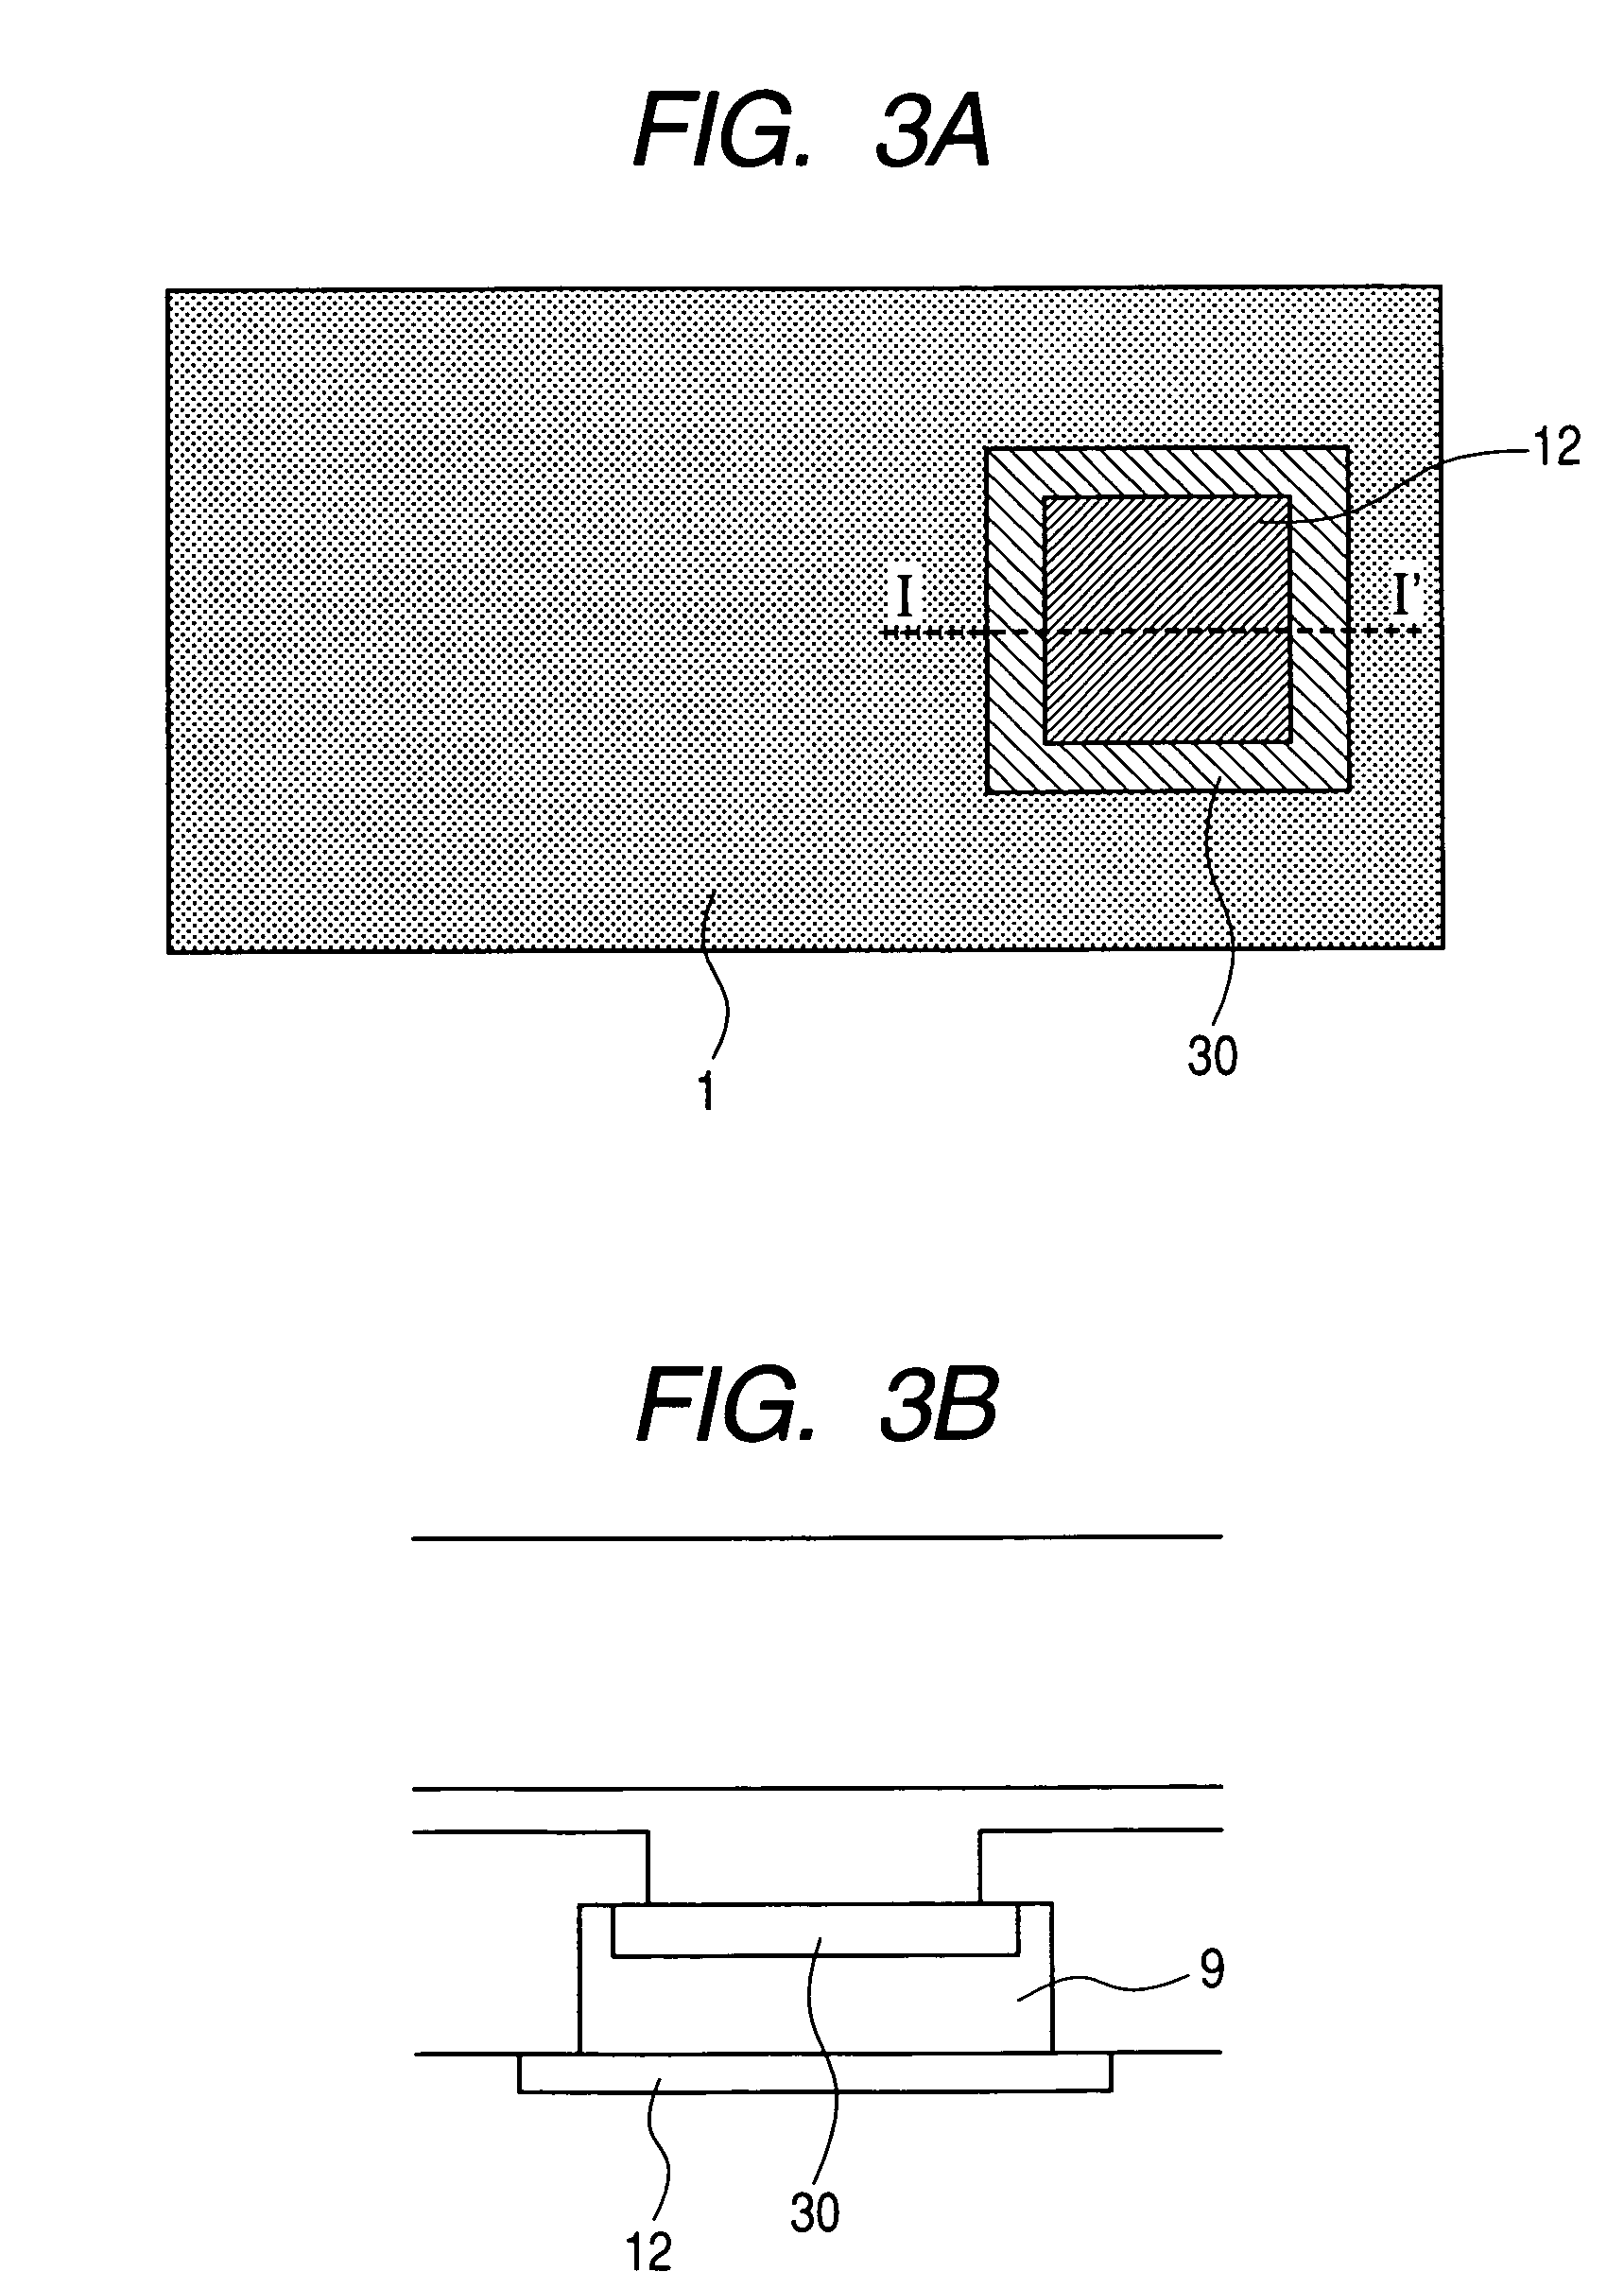 Biochemical reaction cartridge and biochemical treatment equipment system